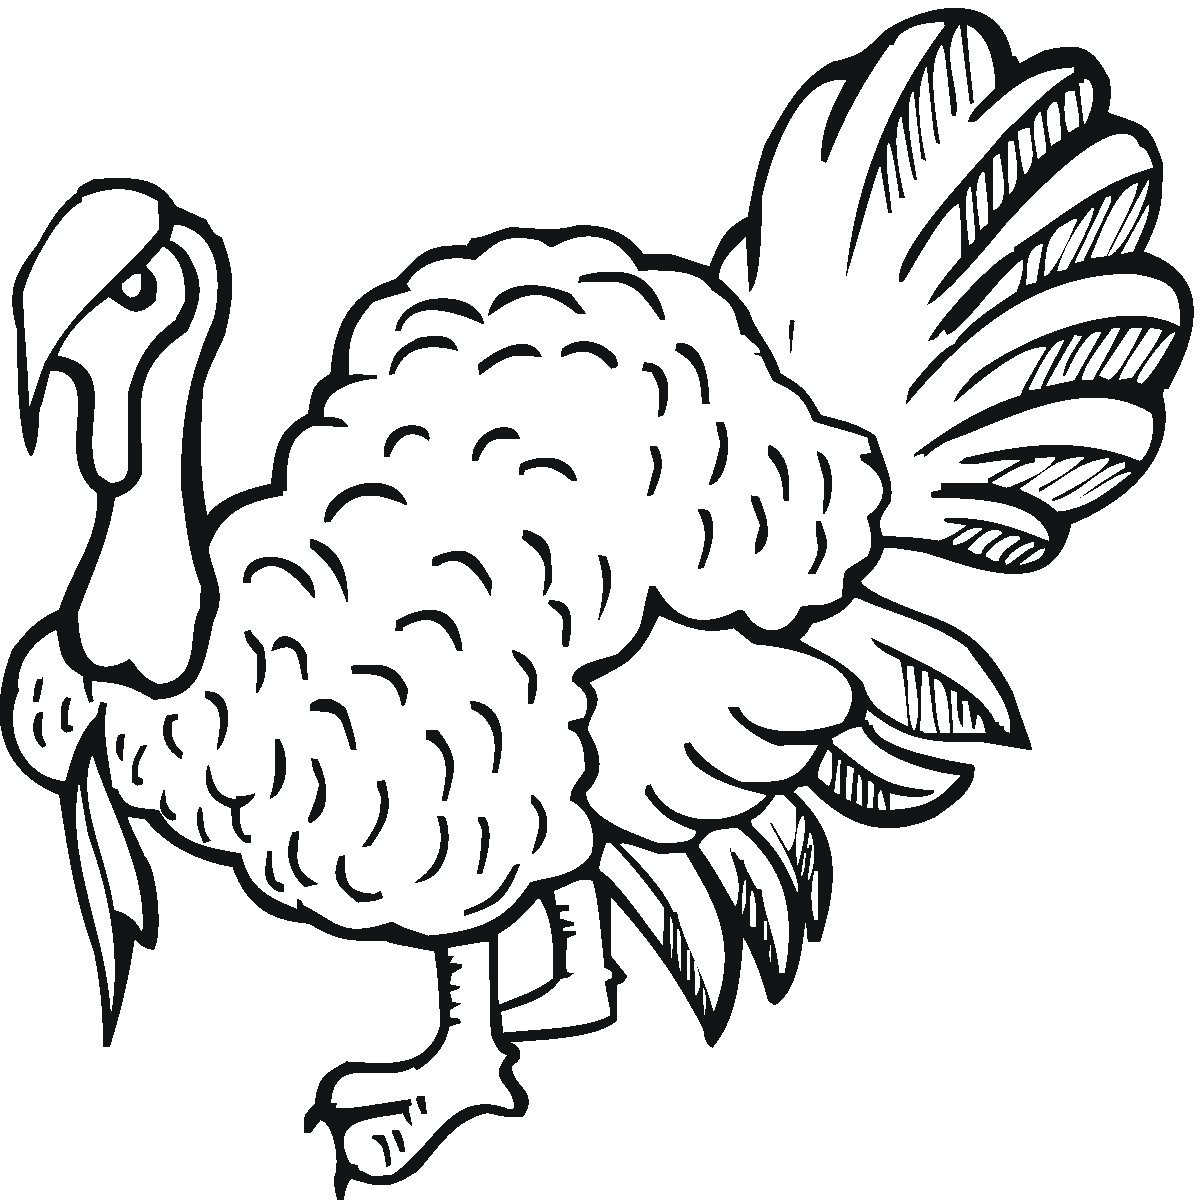 Turkey Printable Coloring Pages